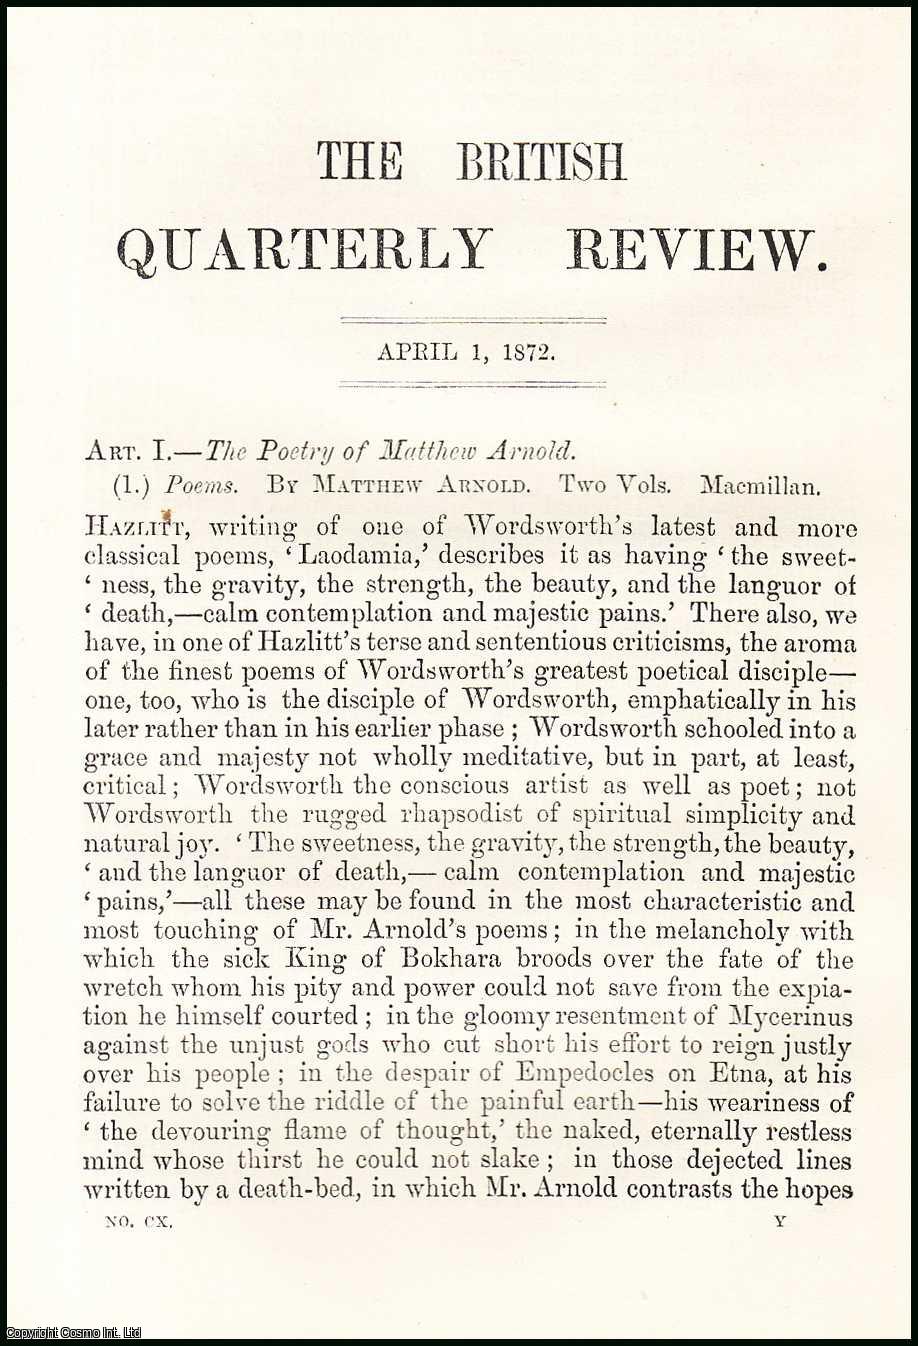 R. H. Hutton - The Poetry of Matthew Arnold. A rare original article from the British Quarterly Review, 1872.